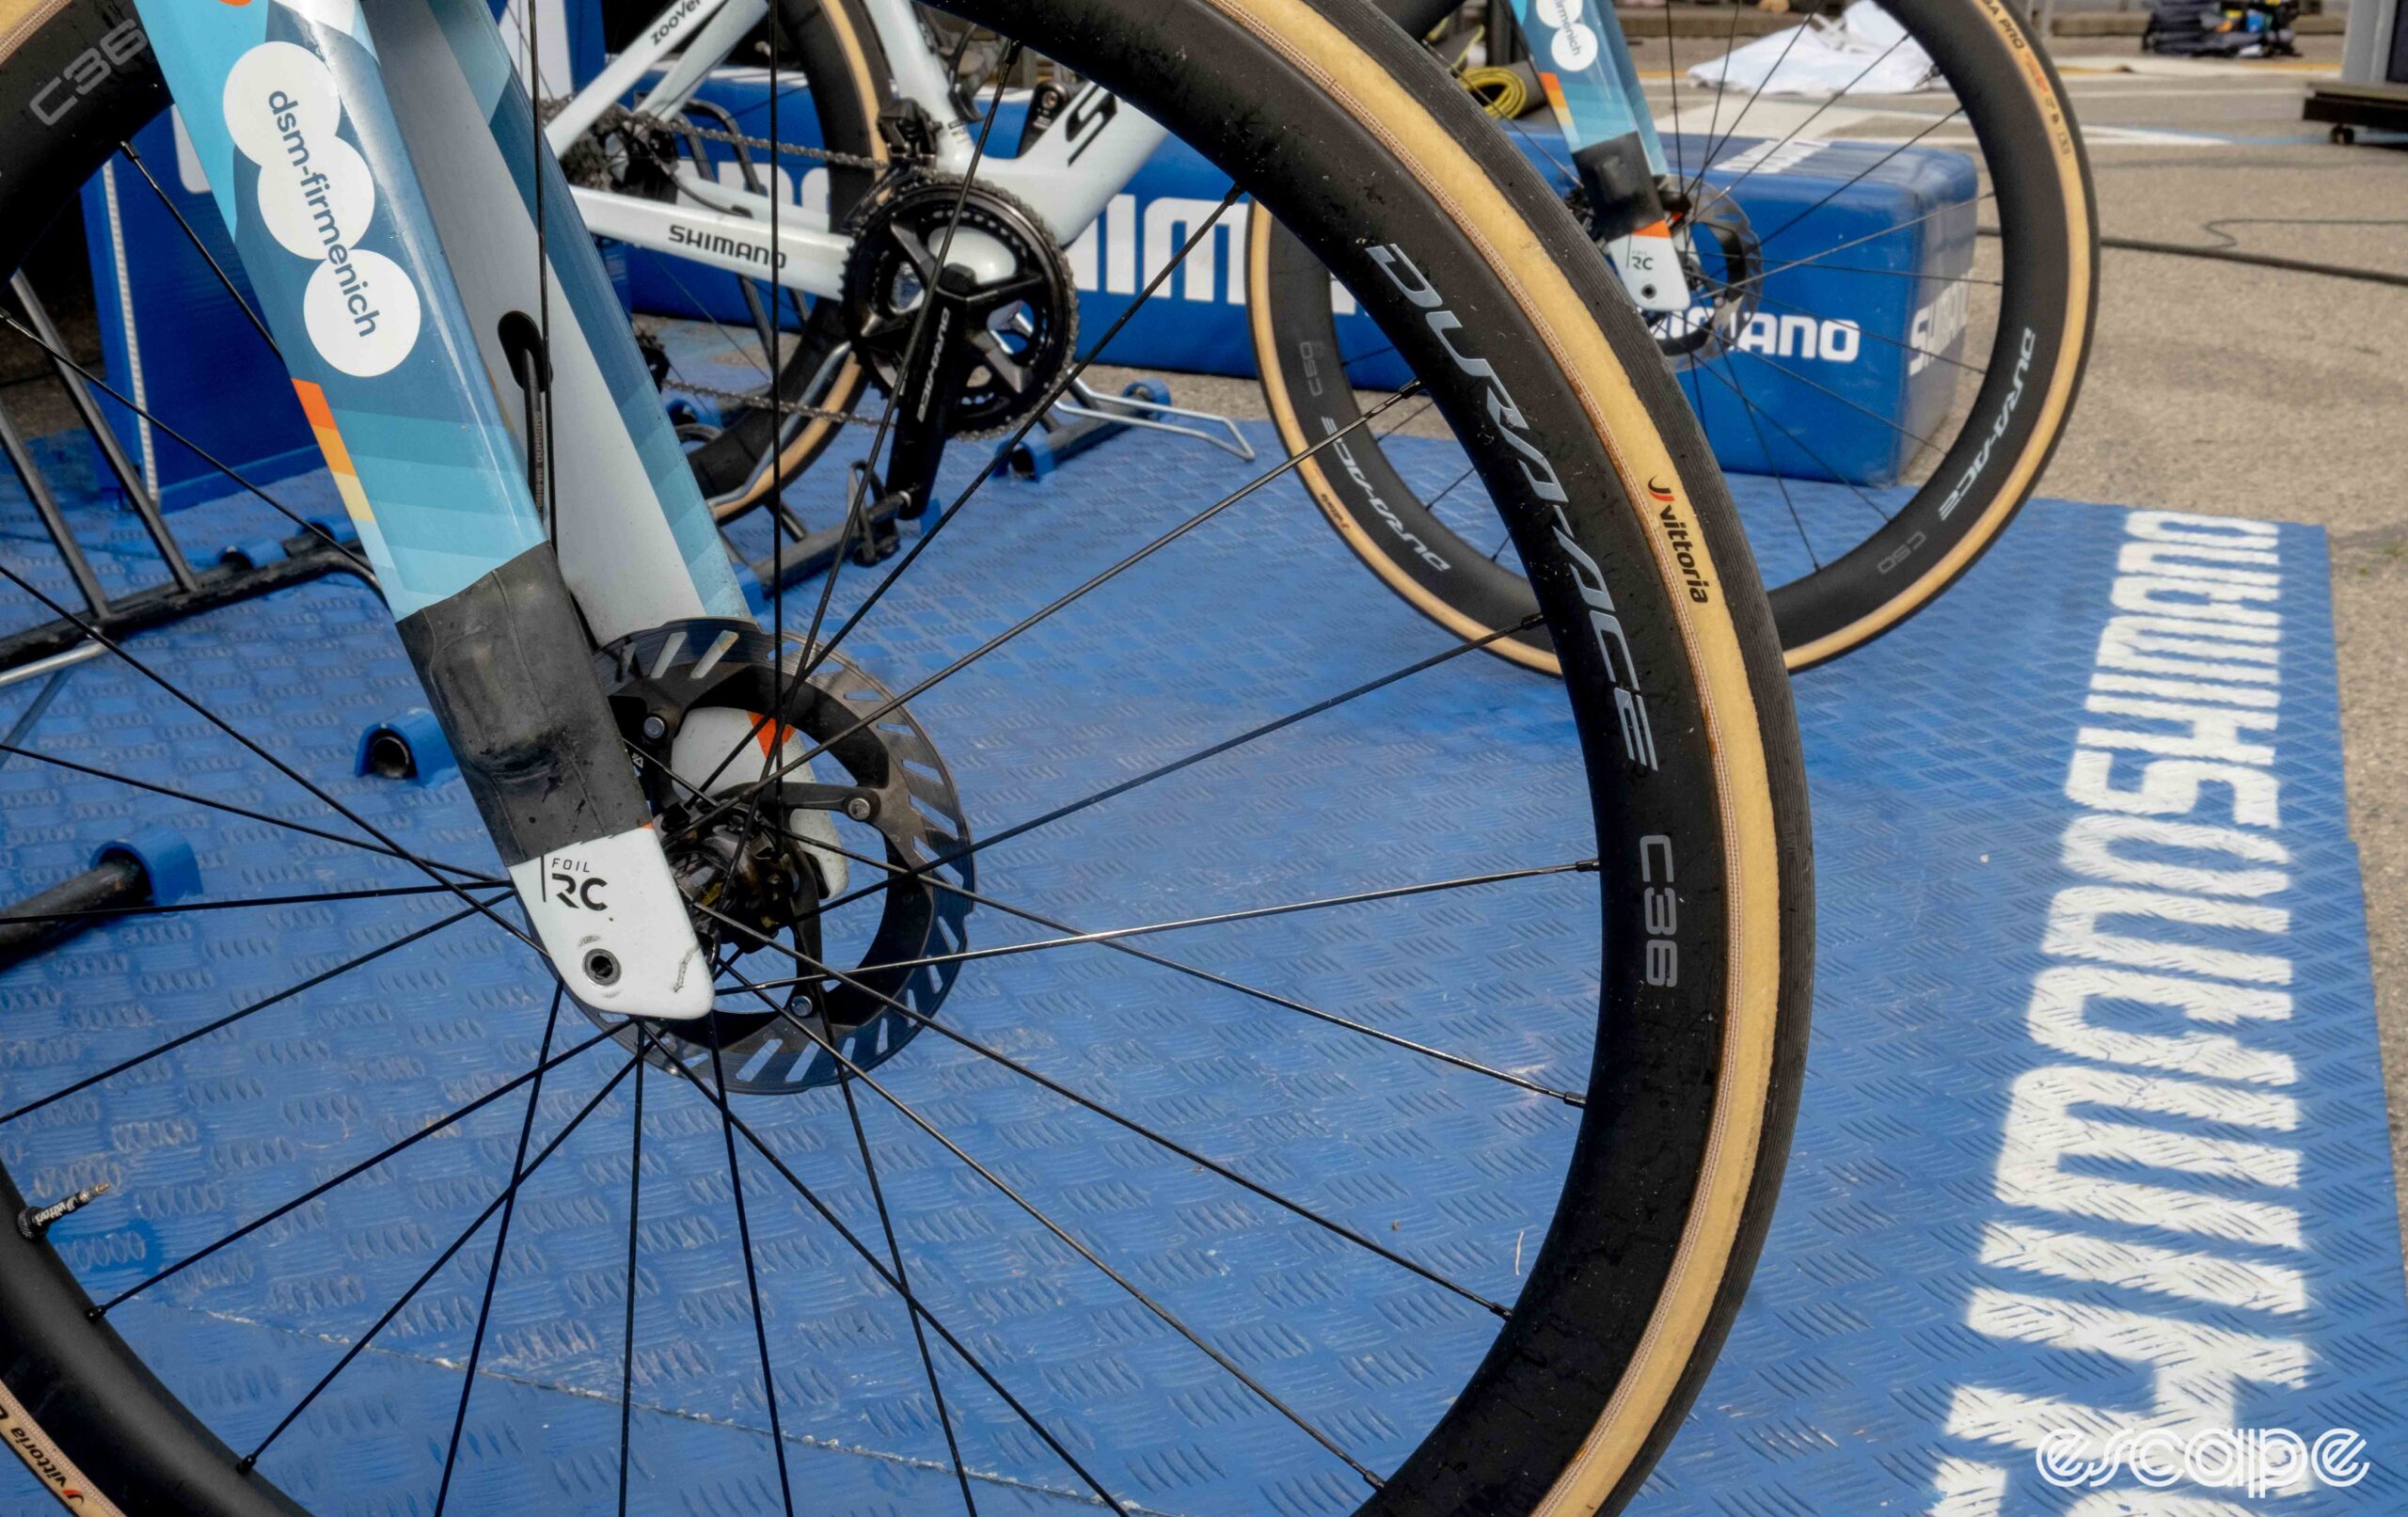 The photo shows Bardet's wheels with van den Broeck's in the background.